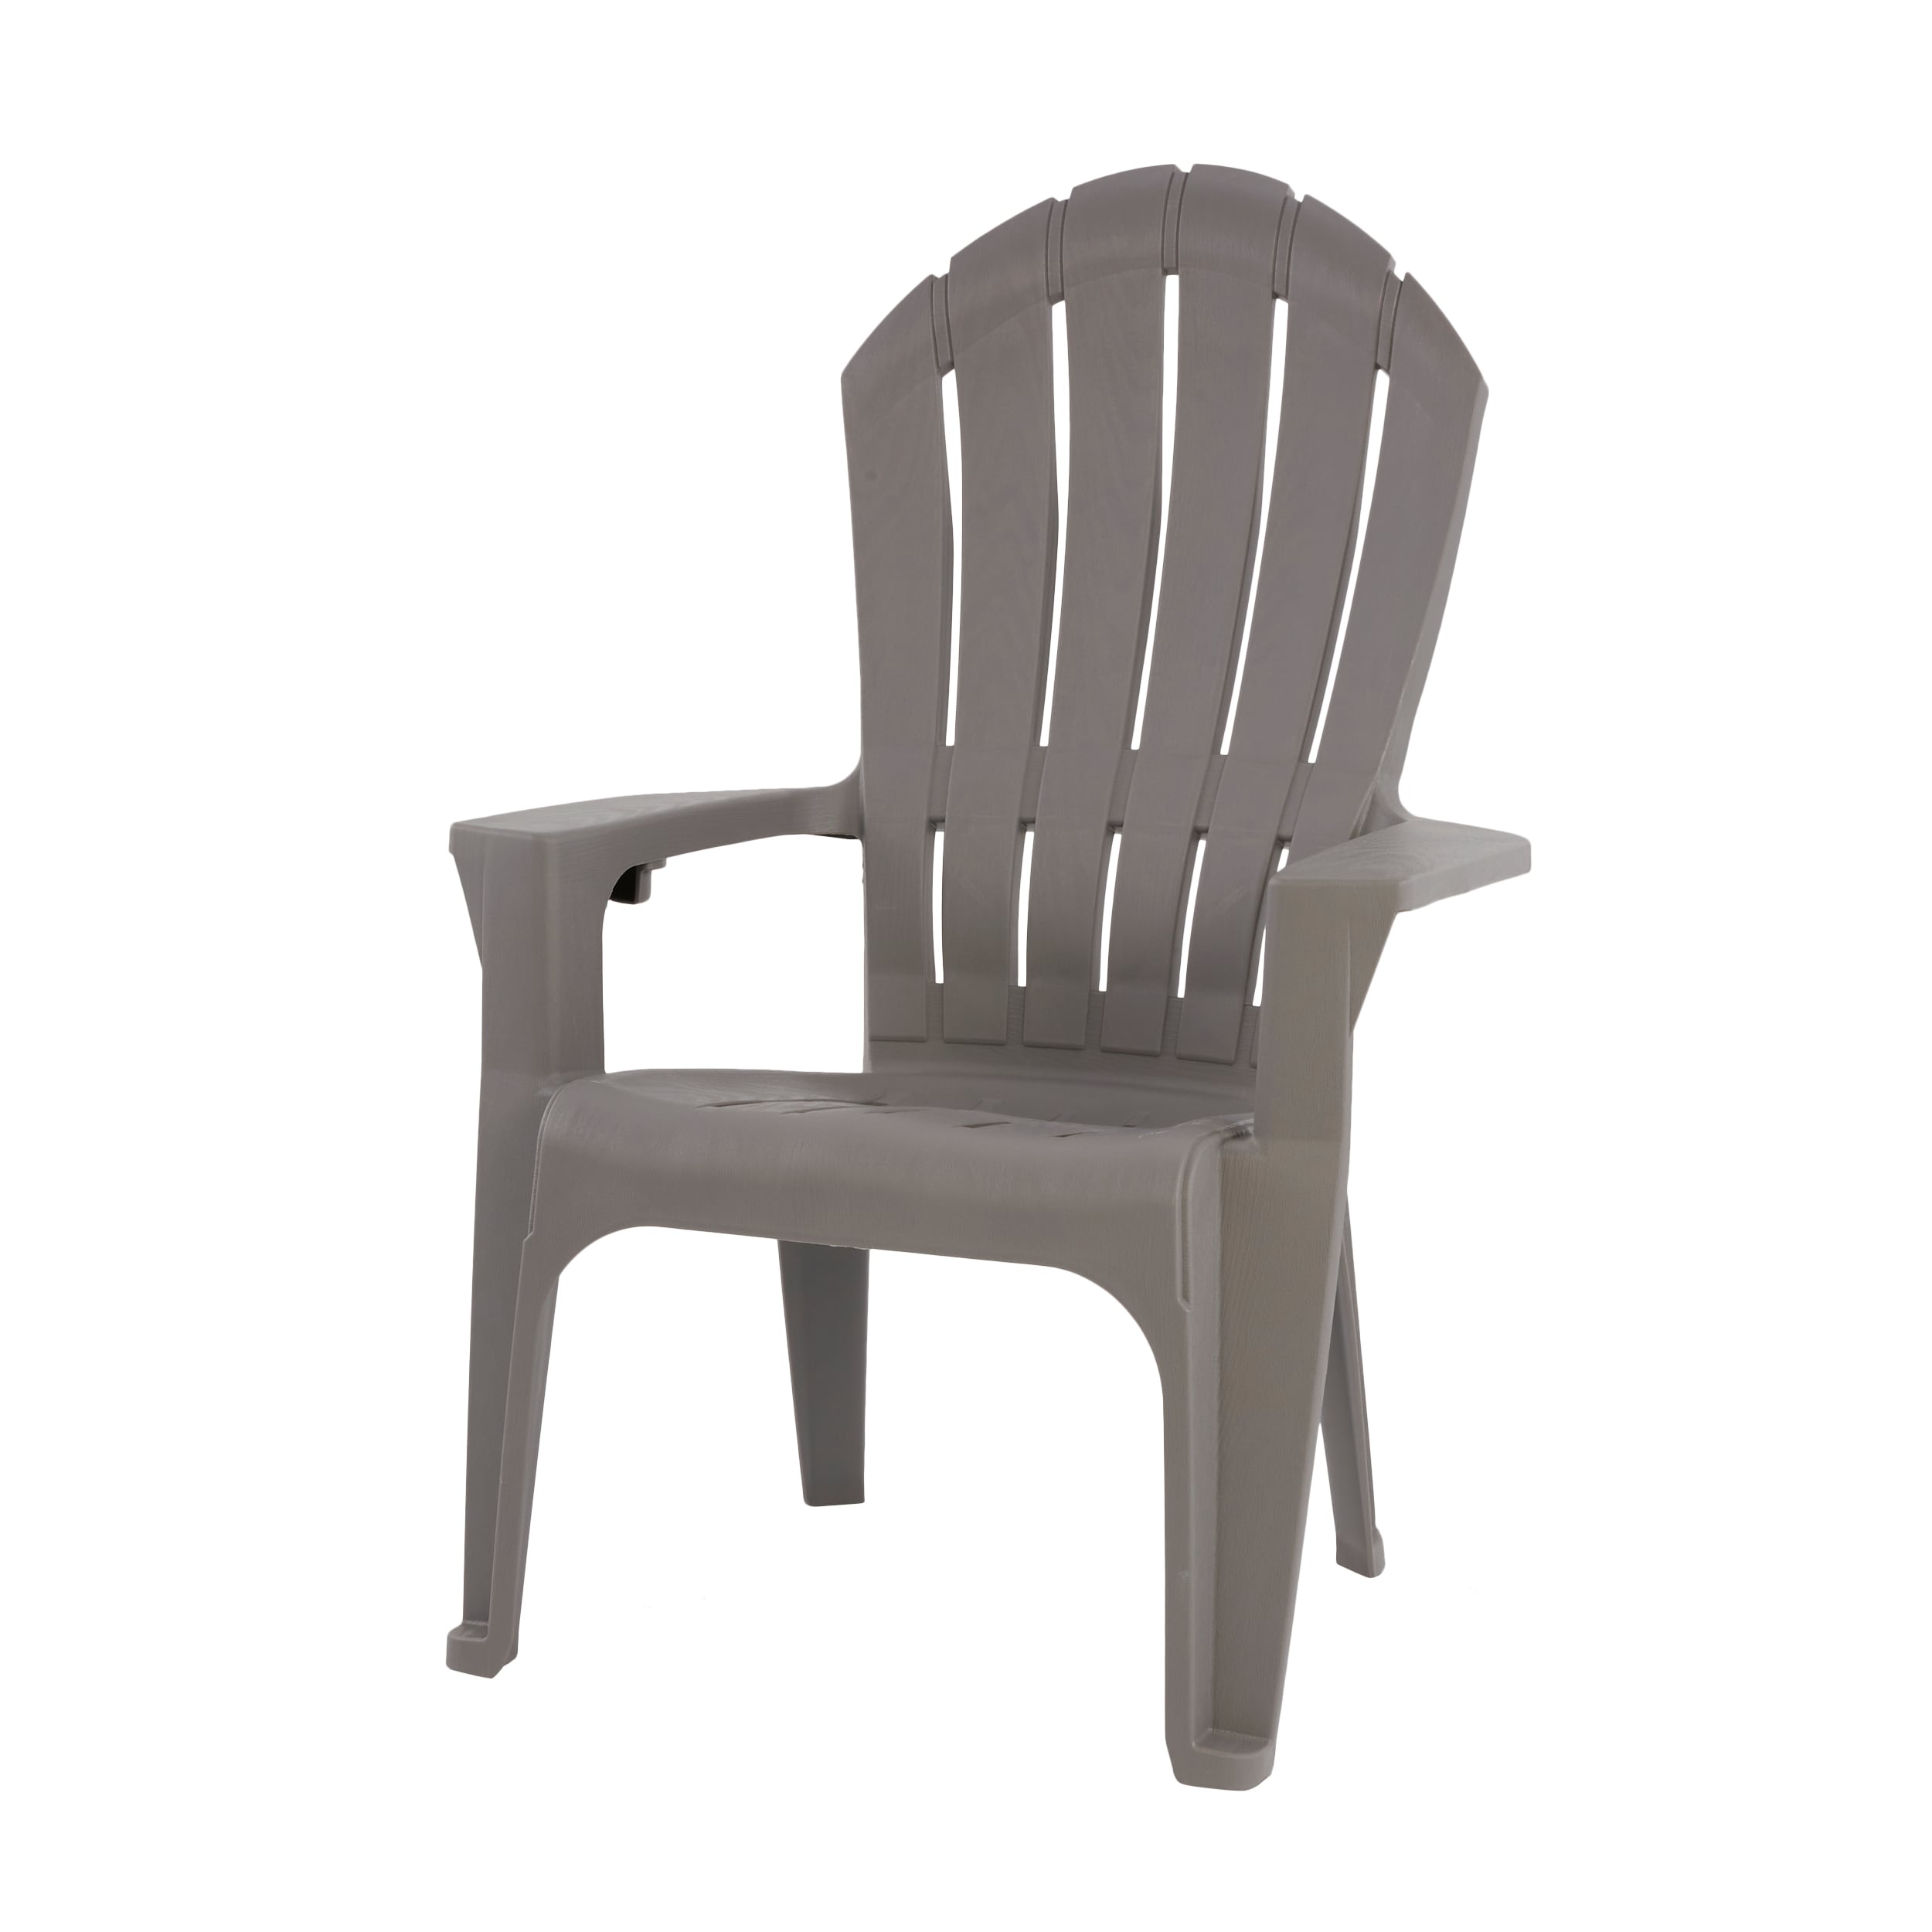 Black Resin Chairs Manufacturer  Louis Style Dining Chairs Wholesale